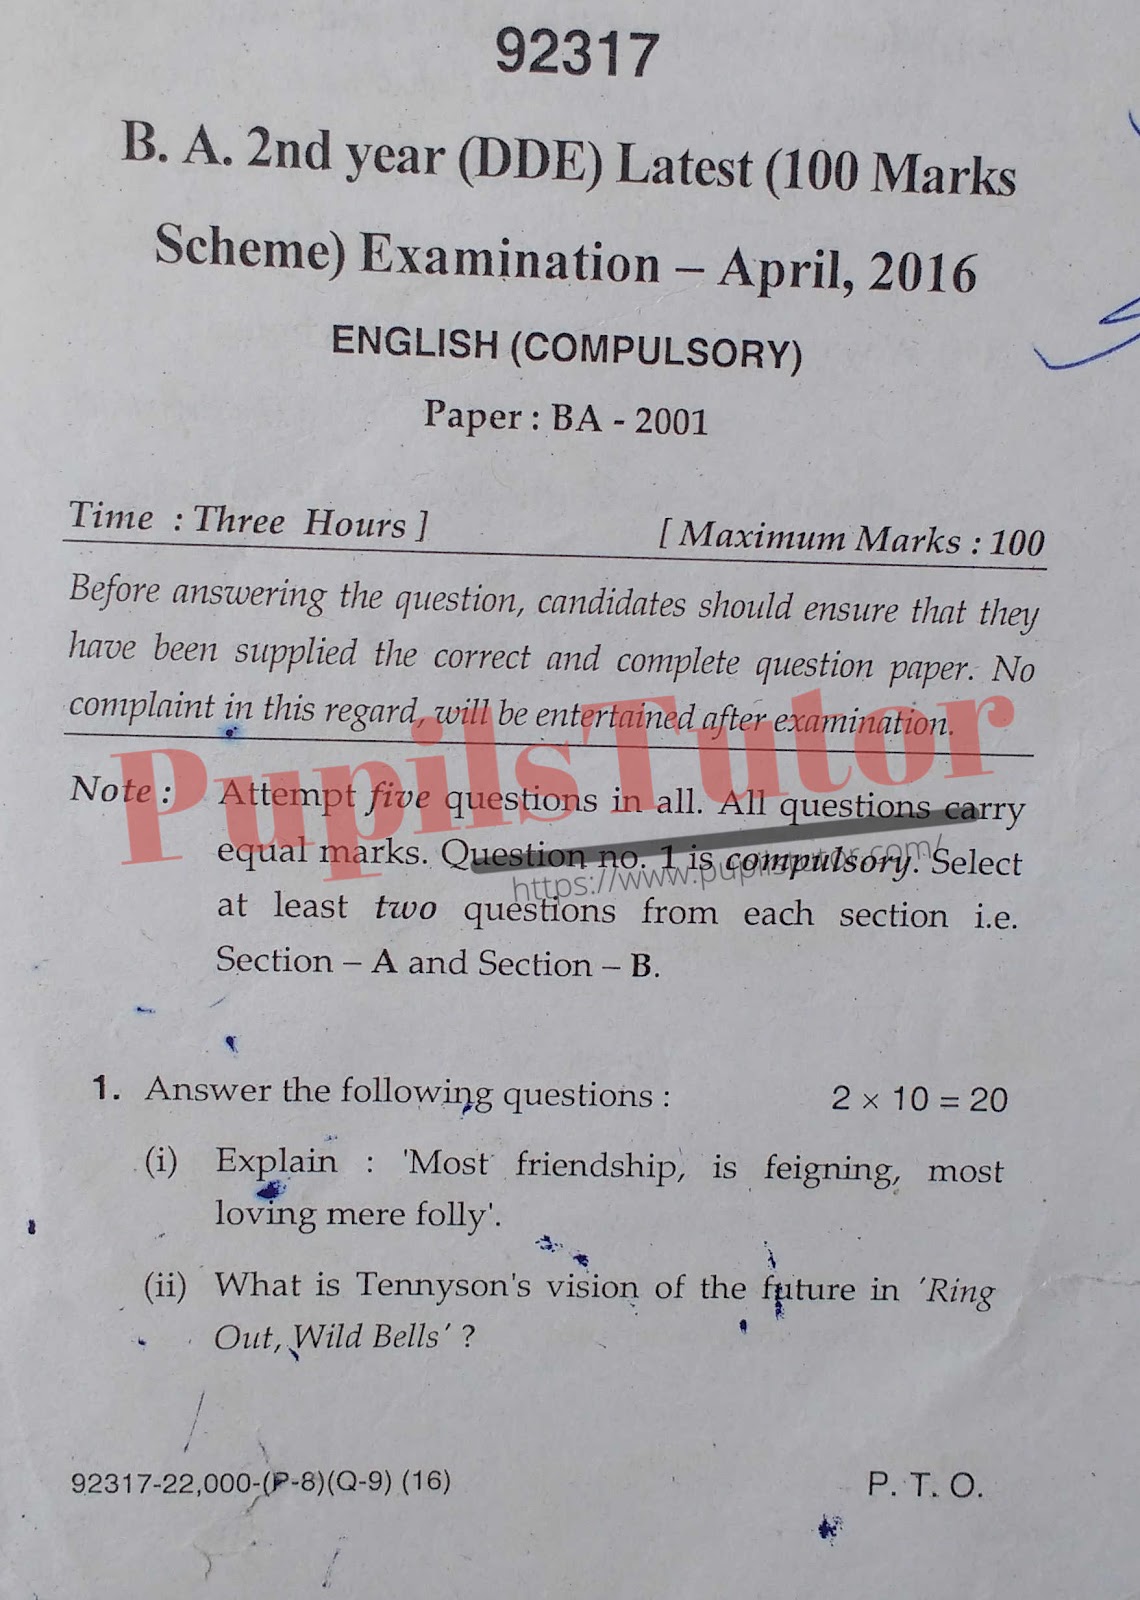 MDU DDE (Maharshi Dayanand University - Directorate of Distance Education, Rohtak Haryana) BA  Second Year Previous Year English Question Paper For April, 2016 Exam (Question Paper Page 1) - pupilstutor.com